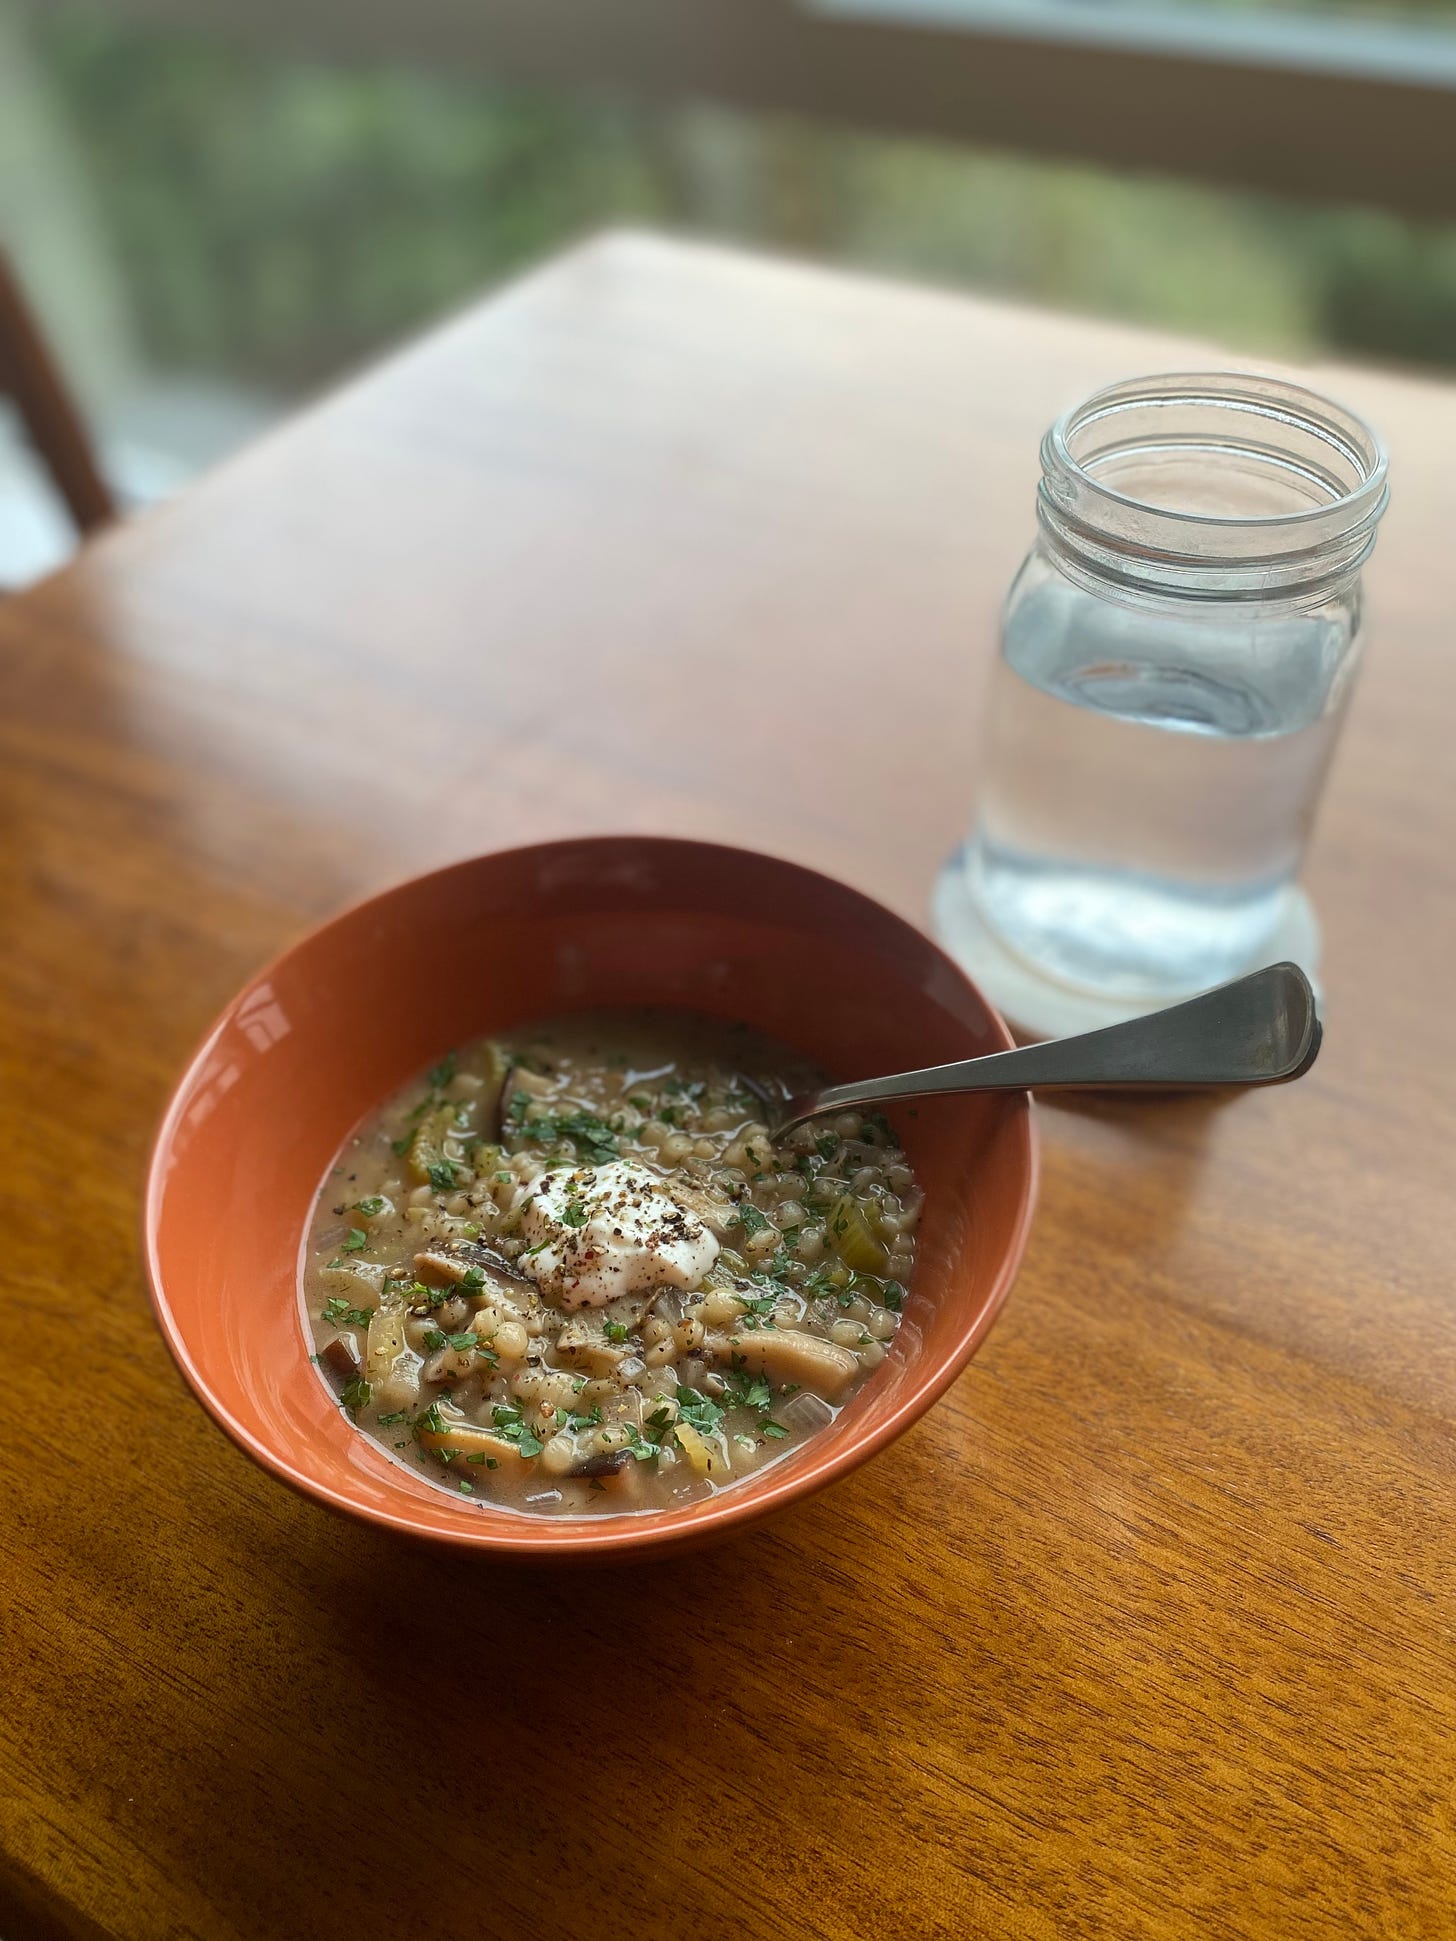 An orange bowl of the mushroom and couscous soup described above, dotted with parsley and black pepper, with a dollop of sour cream in the middle. A spoon sticks out of the bowl on the right side, and a jar of water is on a coaster next to the bowl on the table.